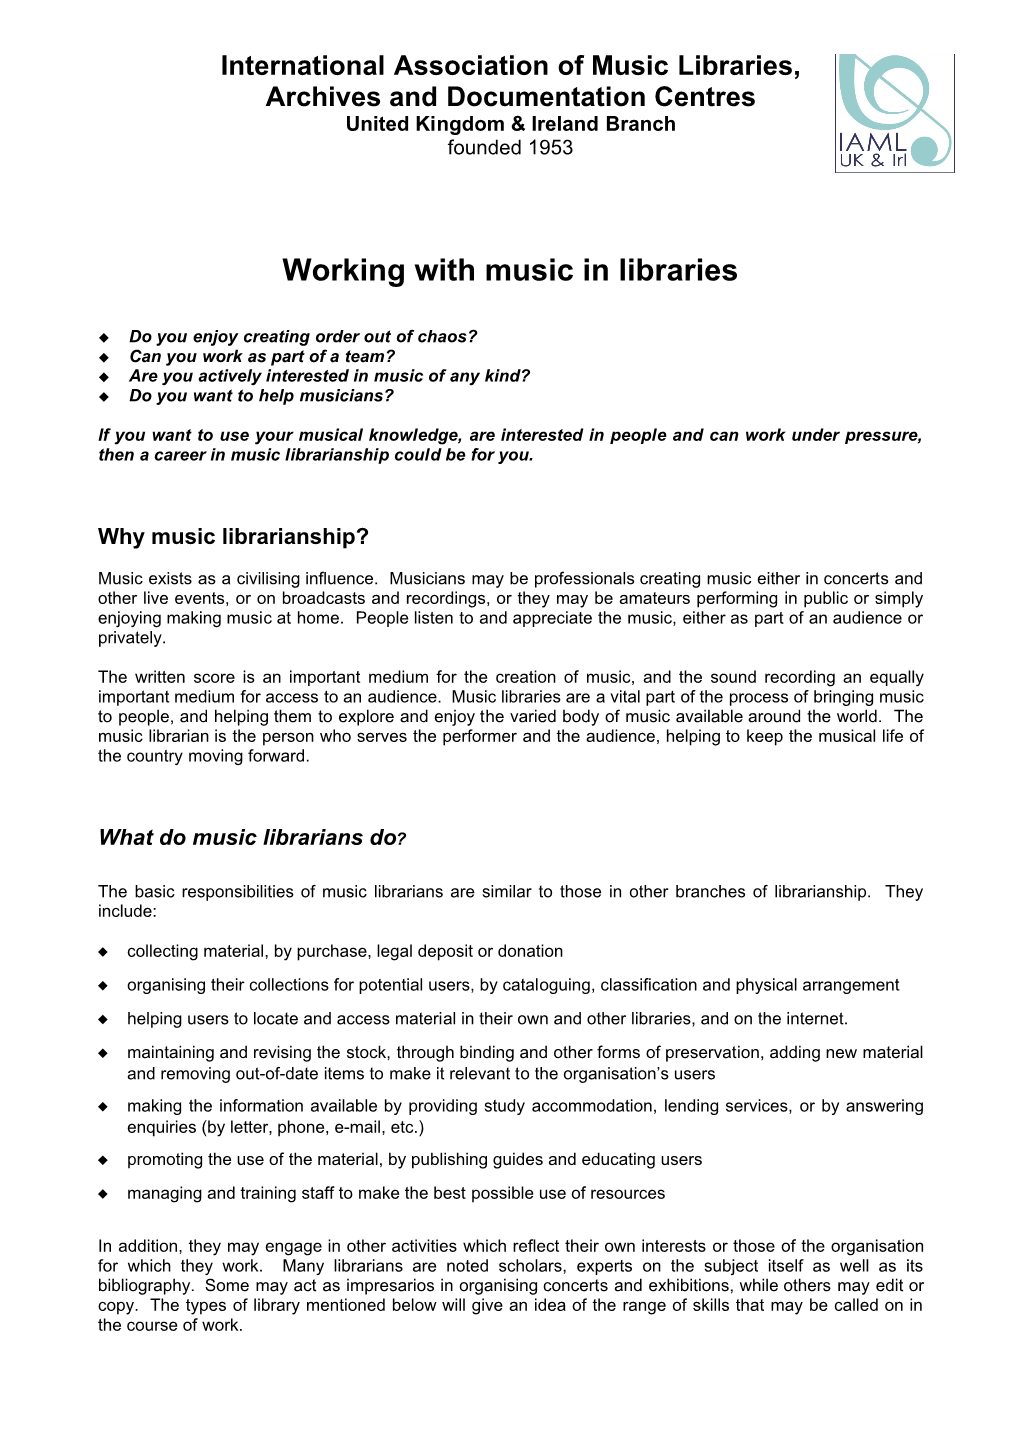 Music Librarianship Could Be for You